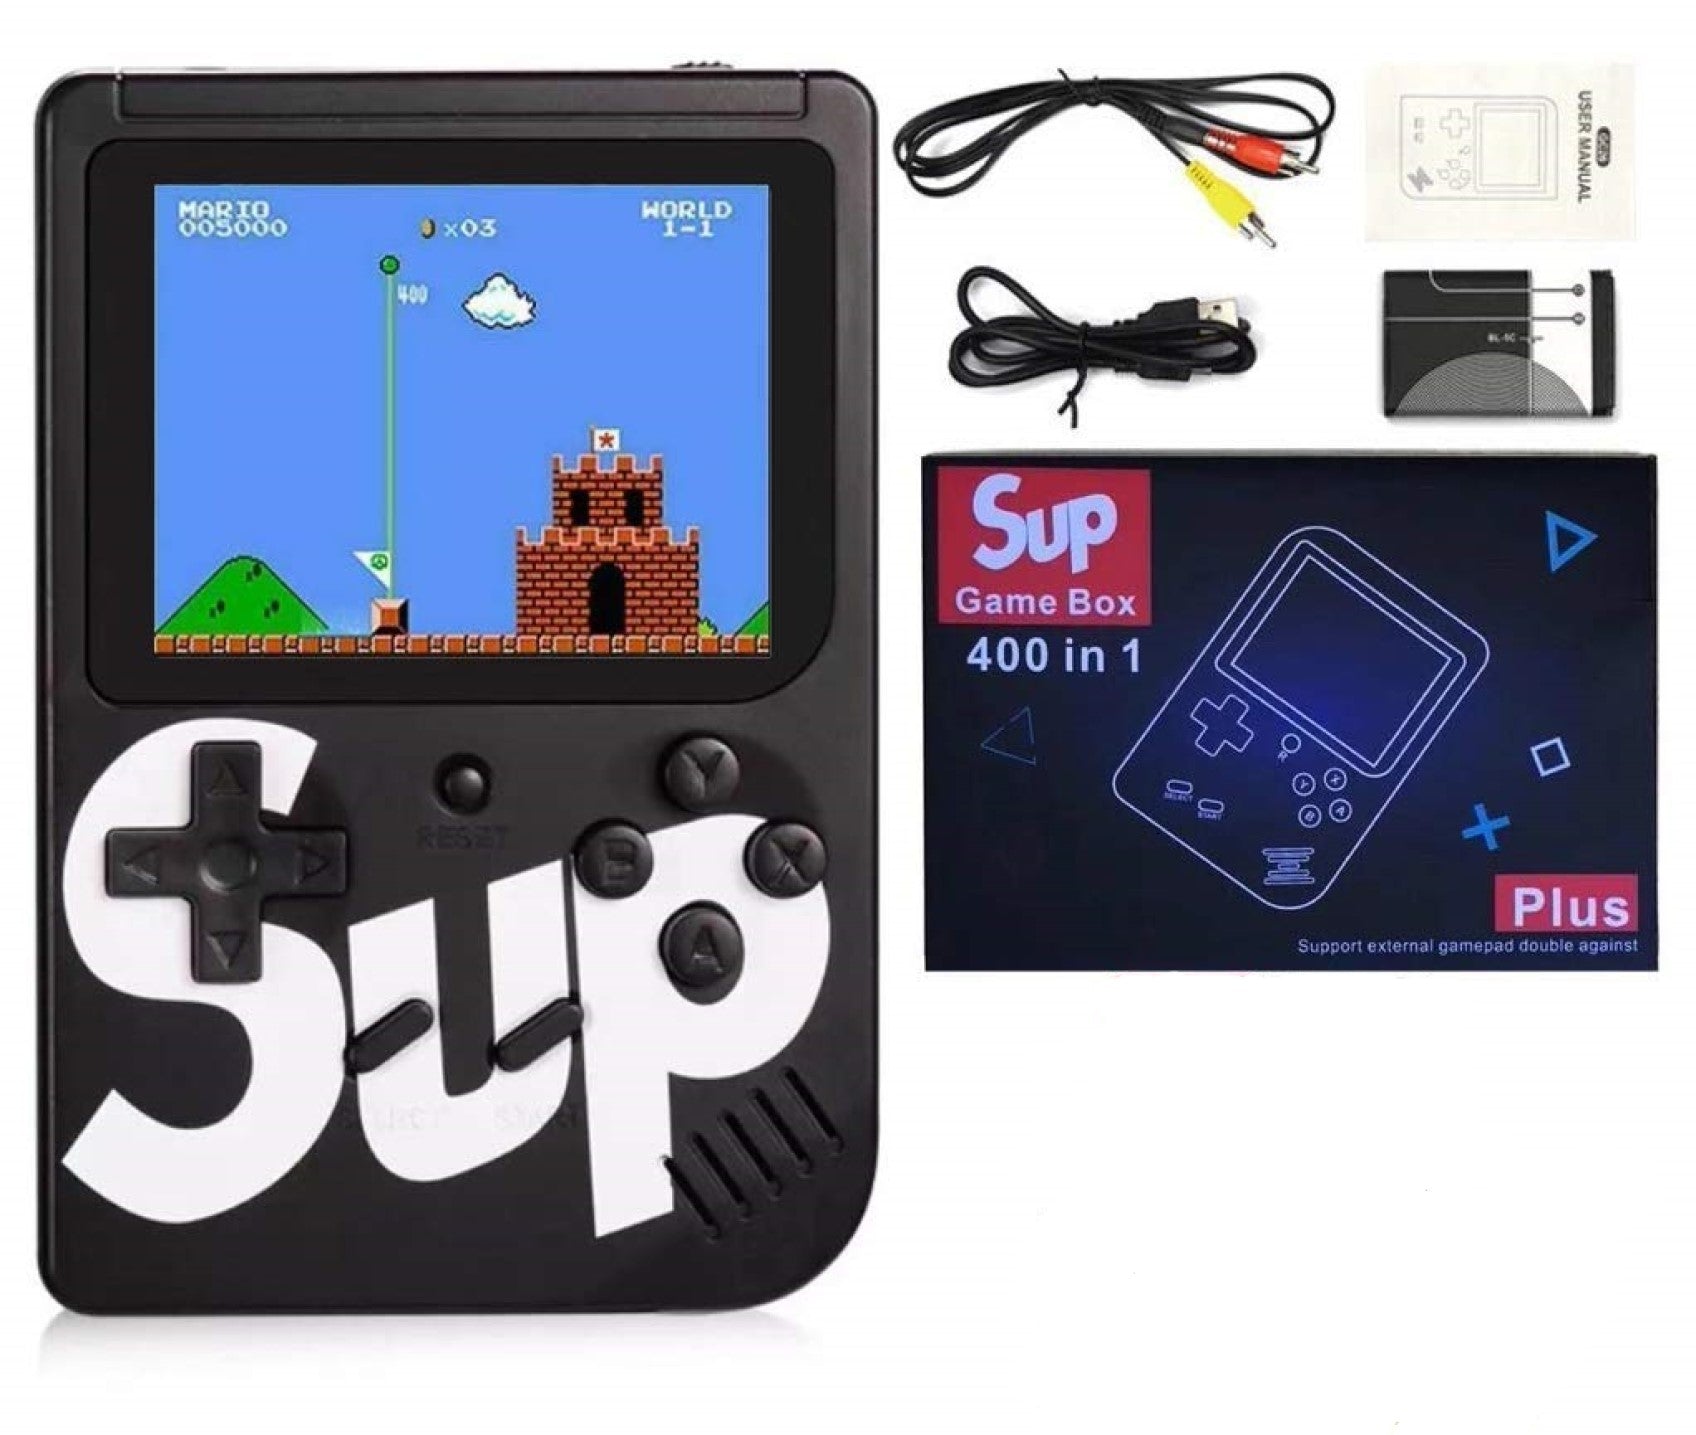 SUP Game Box Plus 400 in 1 Retro Games UPGRADED VERSION mini Portable  Console - Yellow, LC-GMBOX-YL, AYOUB COMPUTERS